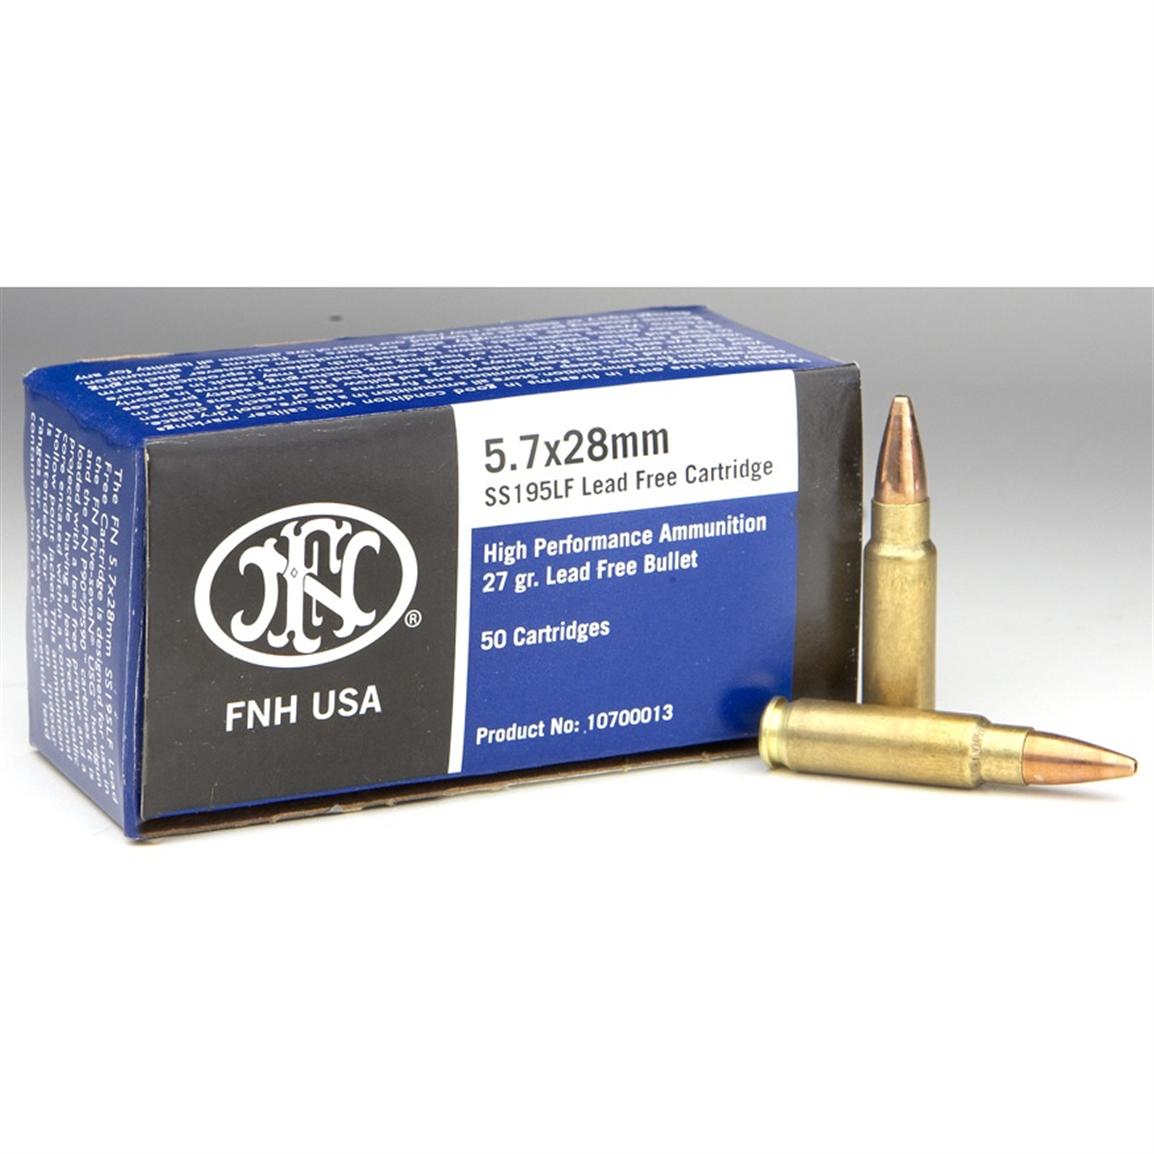 fnh-usa-5-7x28mm-jhp-27-grain-250-rounds-112318-5-7x28mm-ammo-at